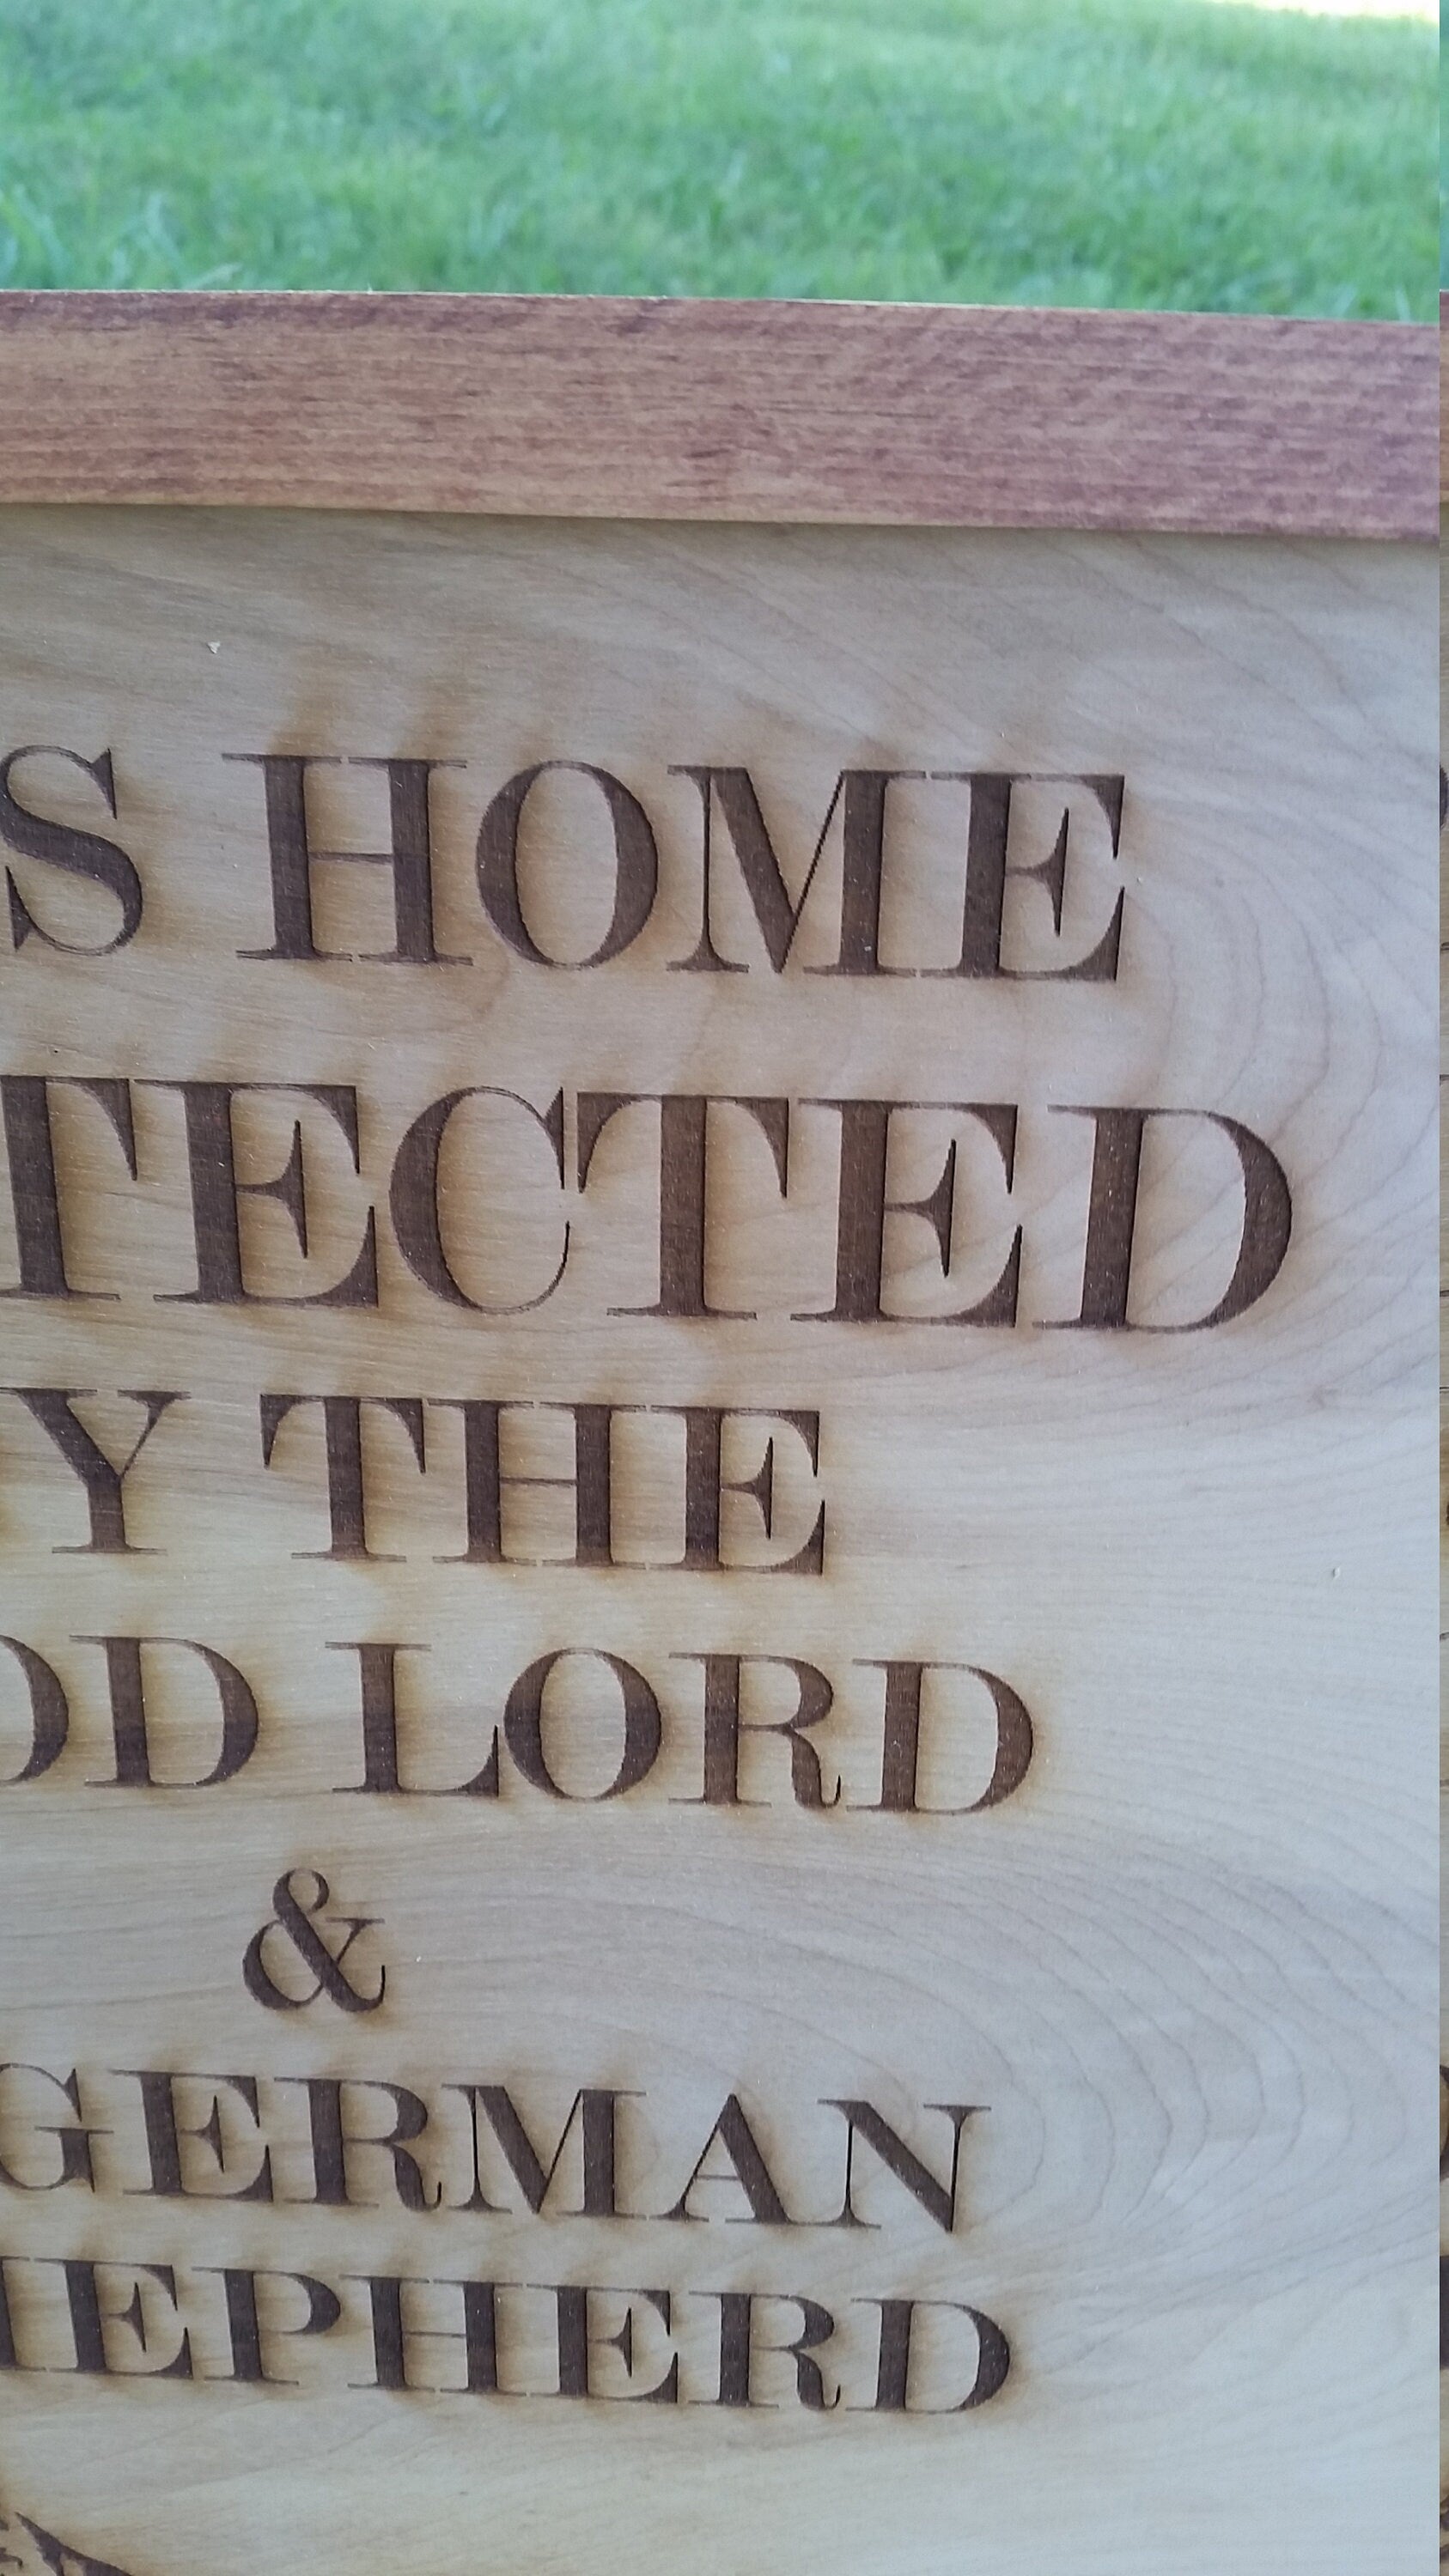 German Shepherd sign, This home is Protected by good Lord and a German Shepherd, Handmade wood Sign, Personalized Signs dog lover gift decor